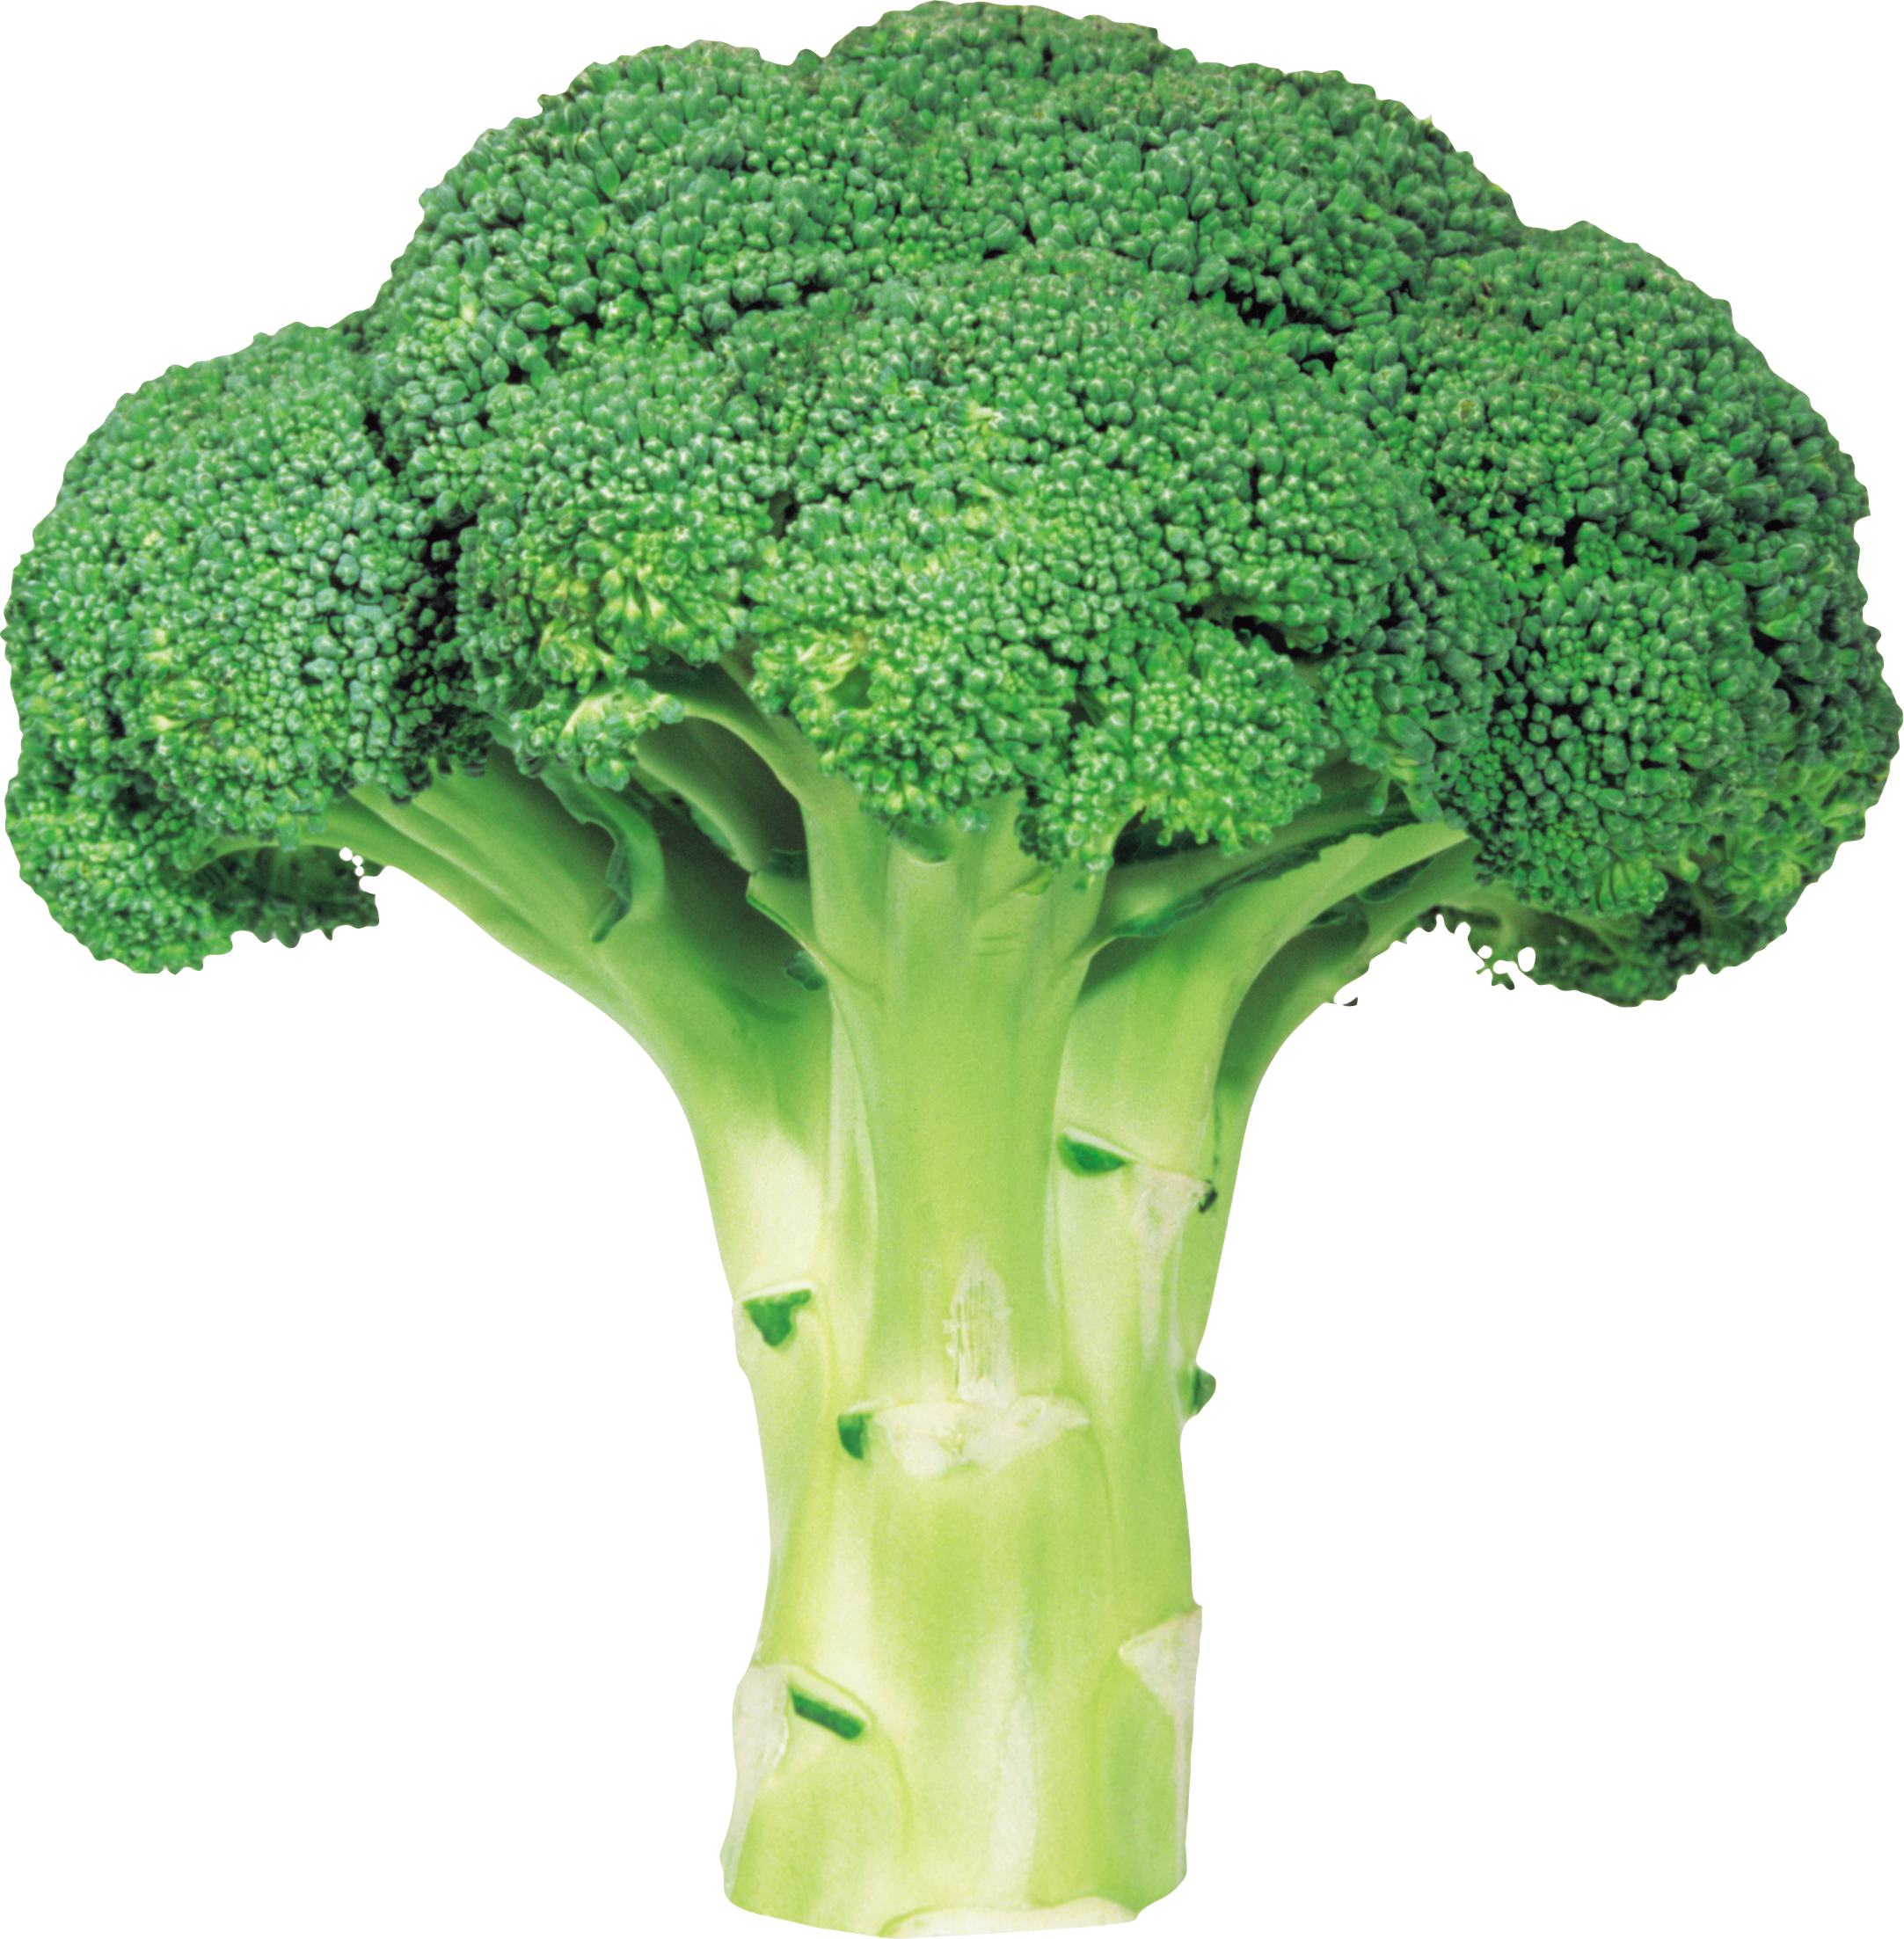 Broccoli Png Image With Transparent Background - Broccoli, Transparent background PNG HD thumbnail